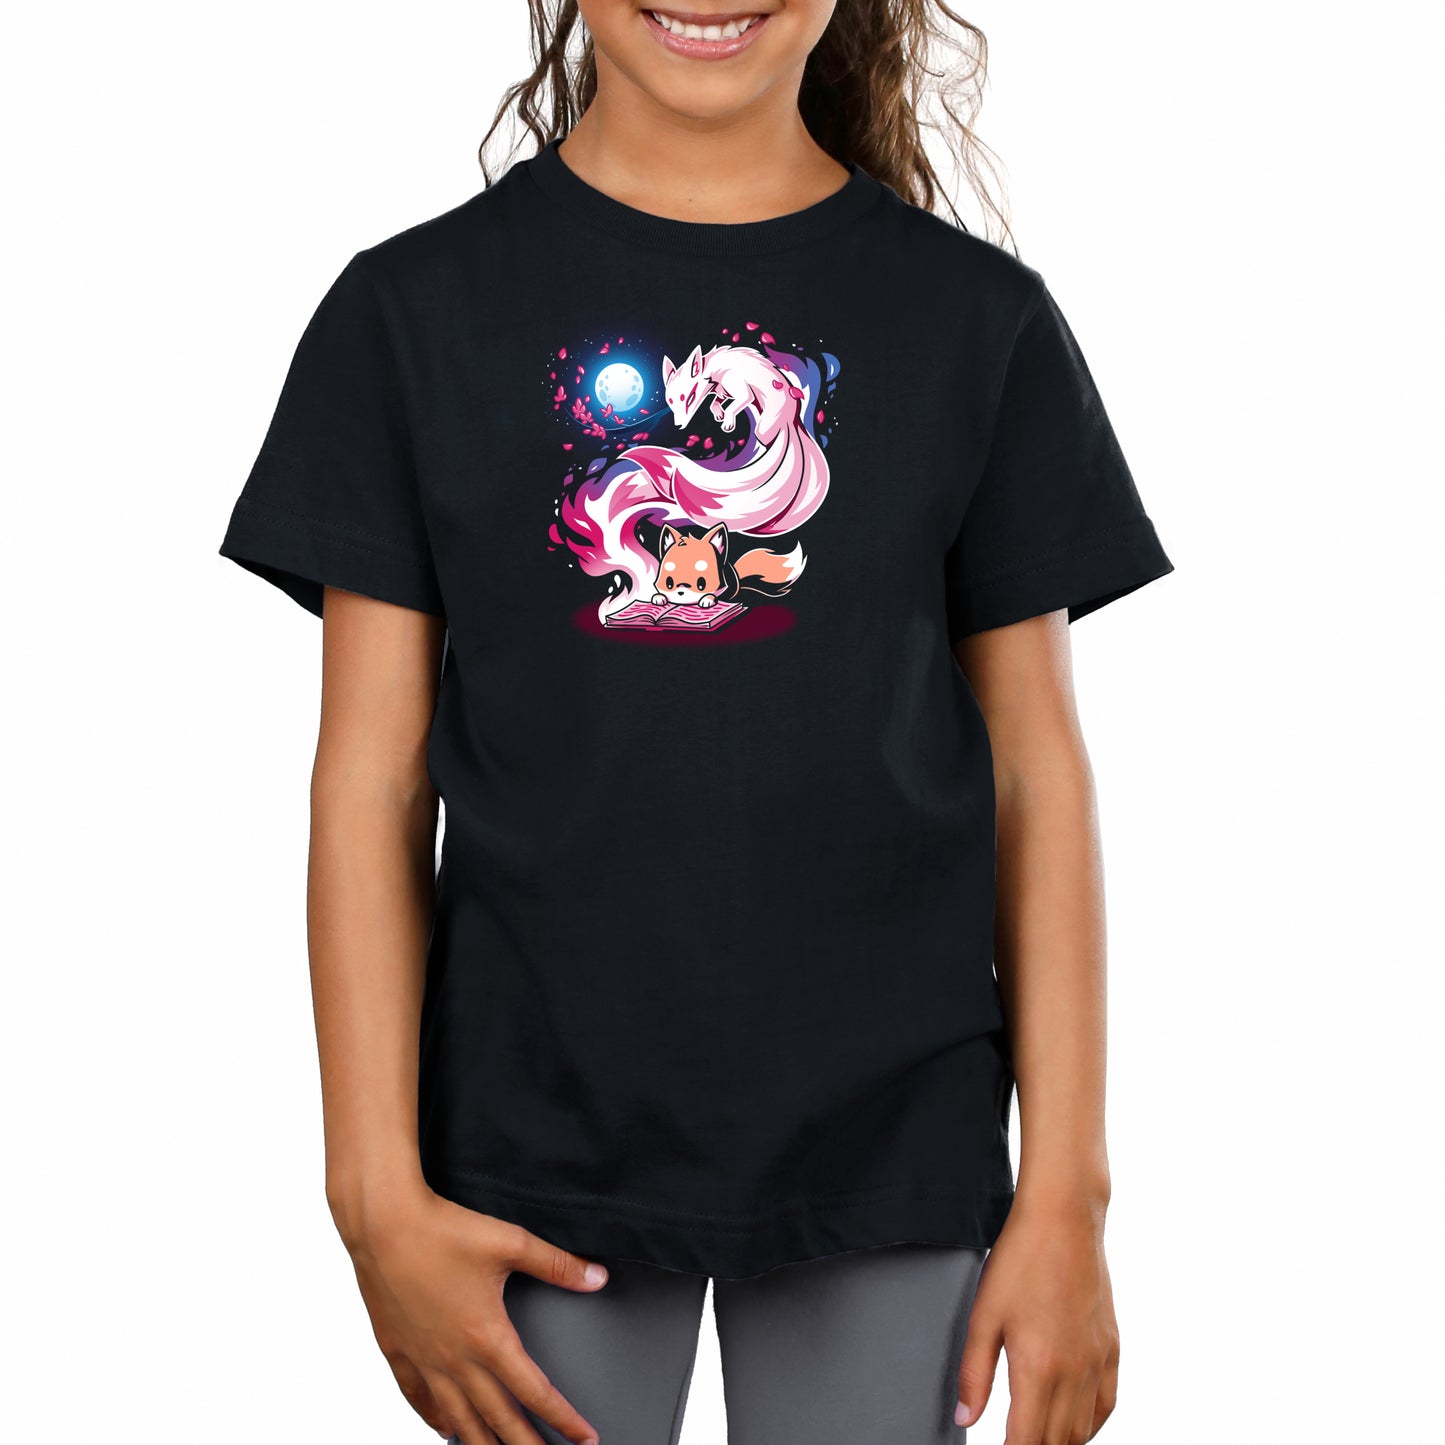 A young girl stands, smiling, wearing a Tale of Tails t-shirt in super soft ringspun cotton by monsterdigital, featuring colorful artwork of two mystical, fox-like creatures beneath a full moon.